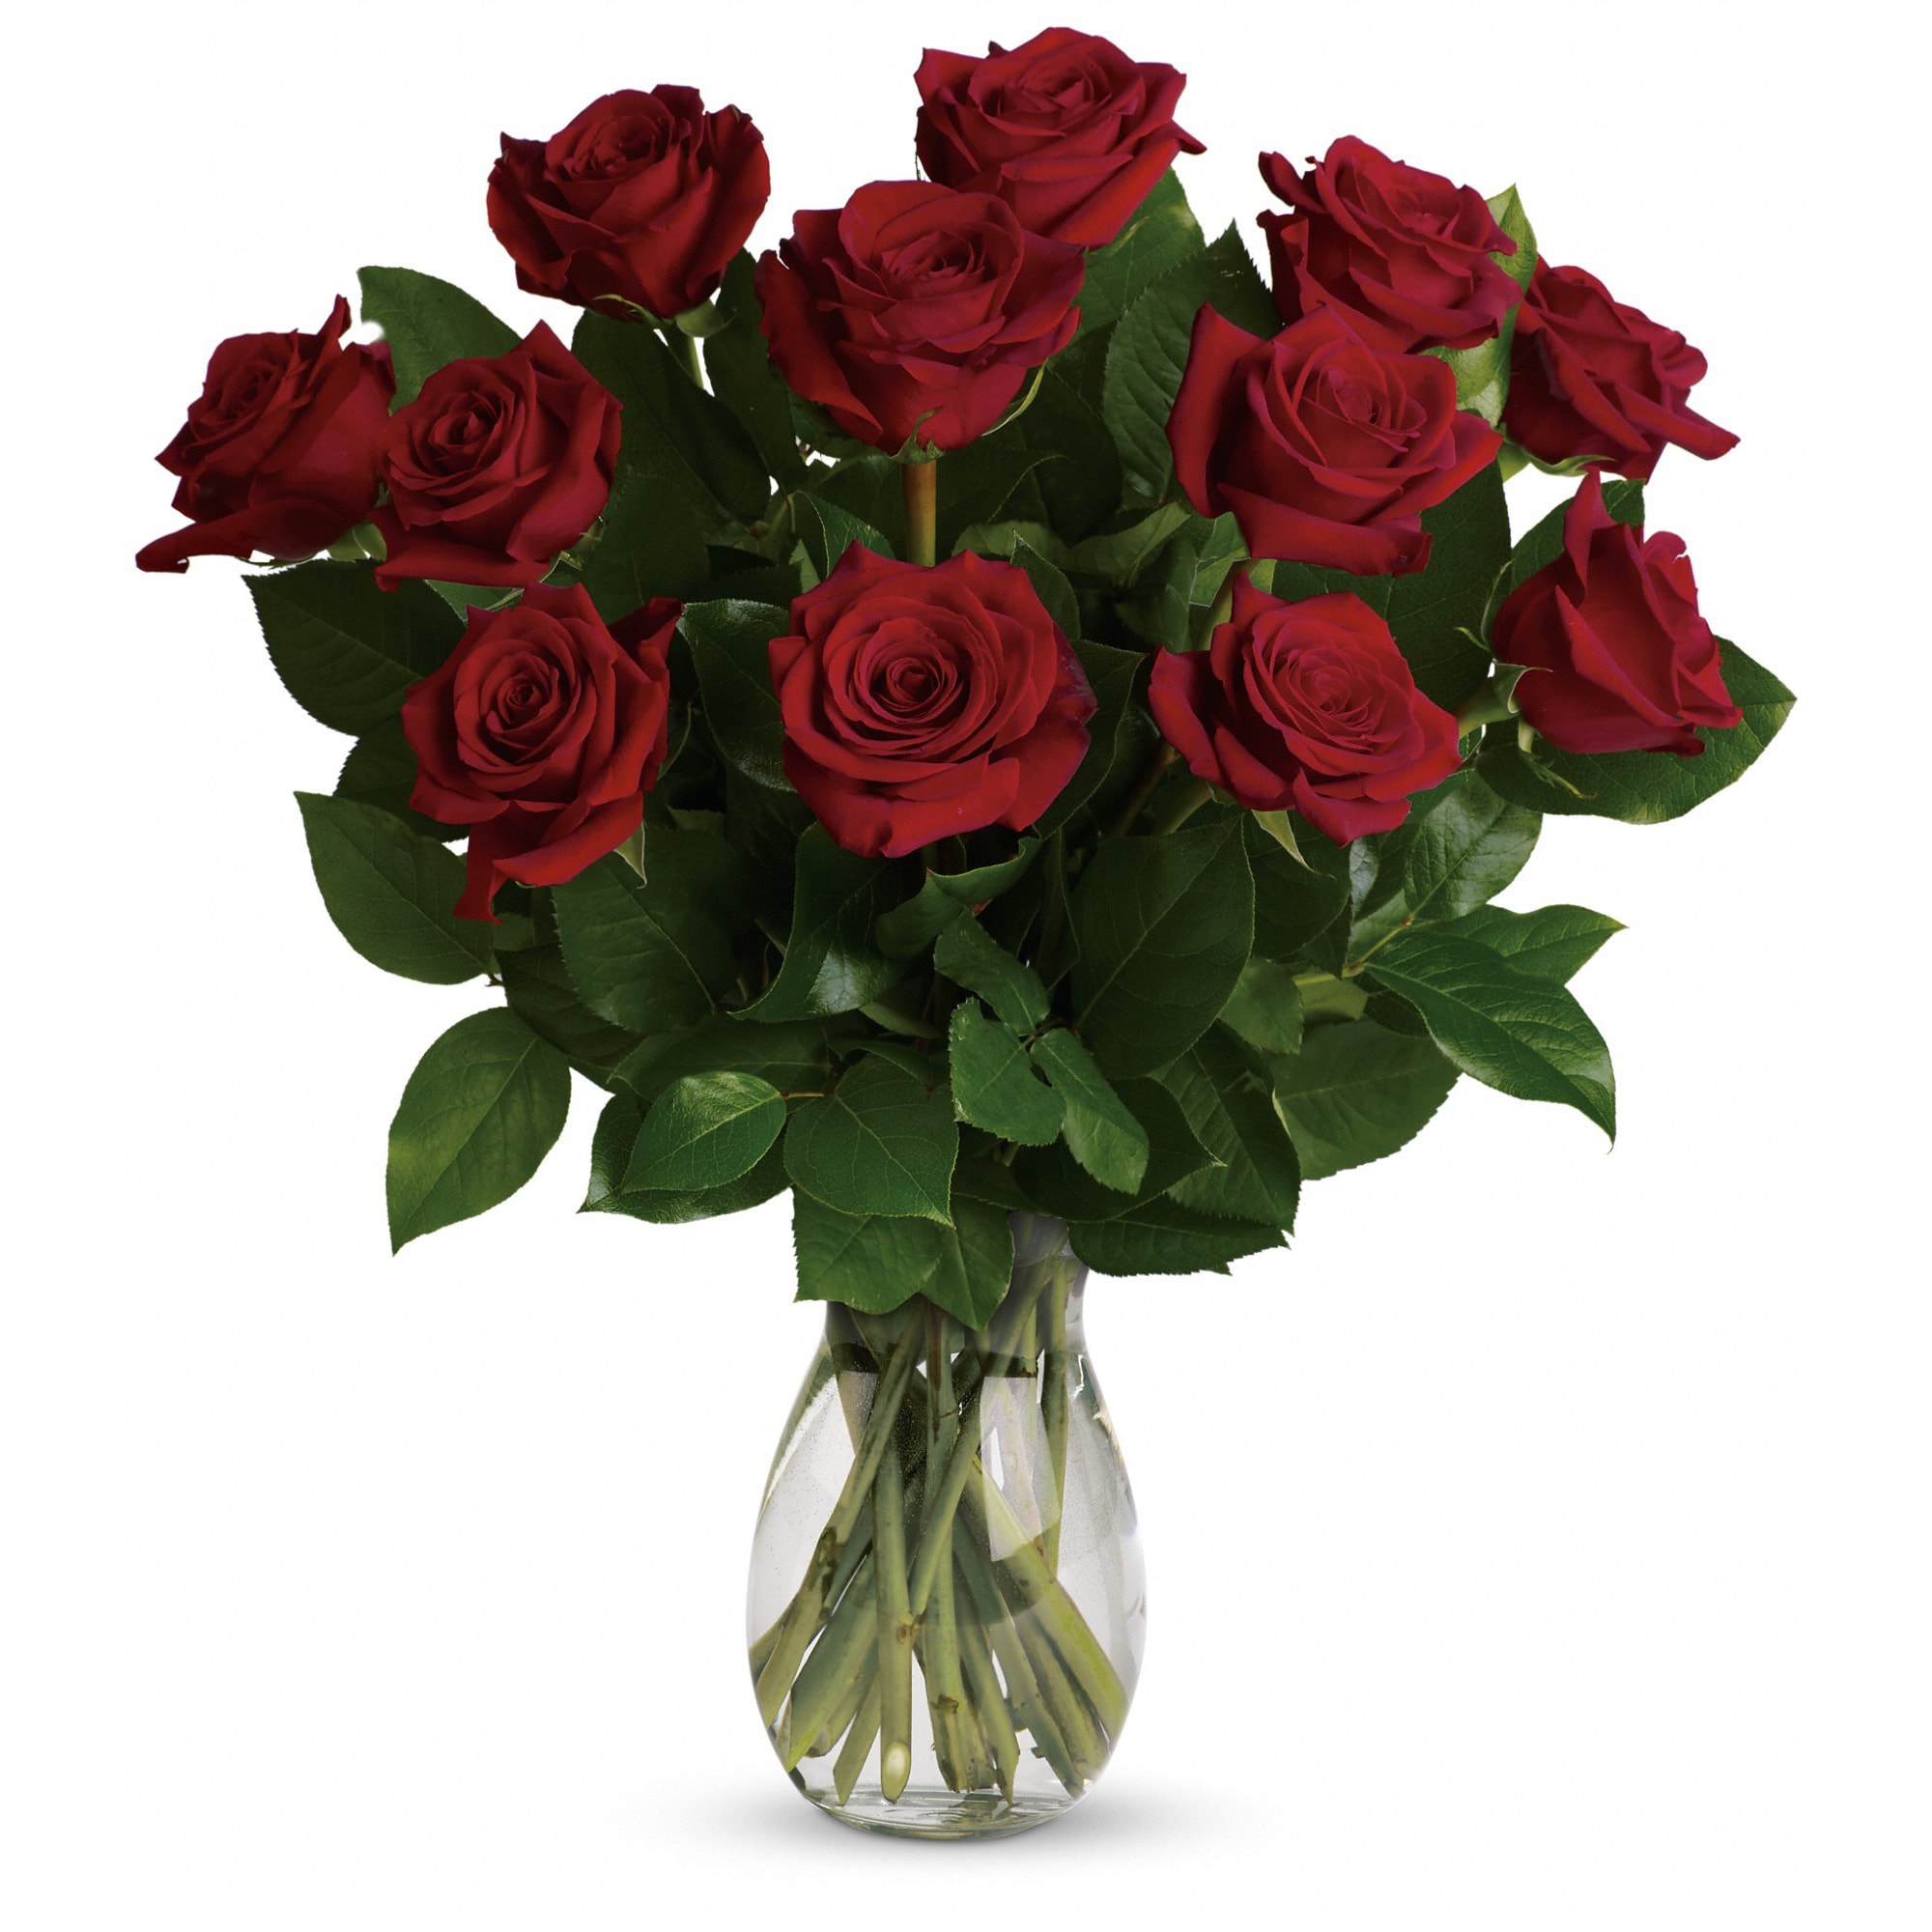 My True Love Bouquet with Long Stemmed Roses - Your devotion, delivered. Surprise your special one with this gorgeous arrangement of one dozen long stem red roses. It's a timeless testimony of your love she won't soon forget. OTHER COLORS AVAILABLE 